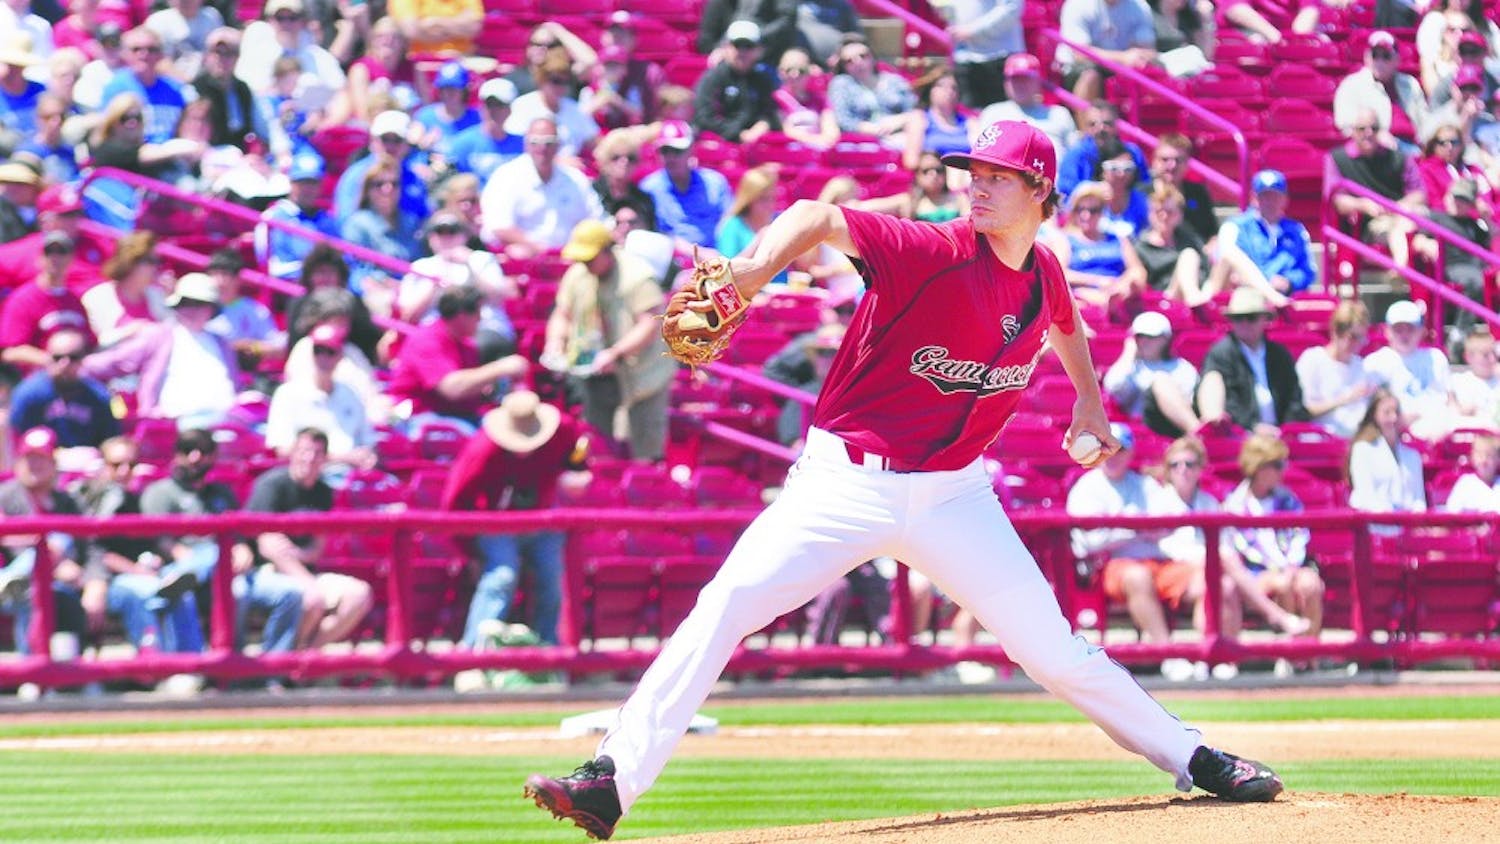 	Sophomore lefty Jack Wynkoop registered a career-high 10 strikeouts in his start Saturday. No South Carolina pitcher allowed a run in the series.